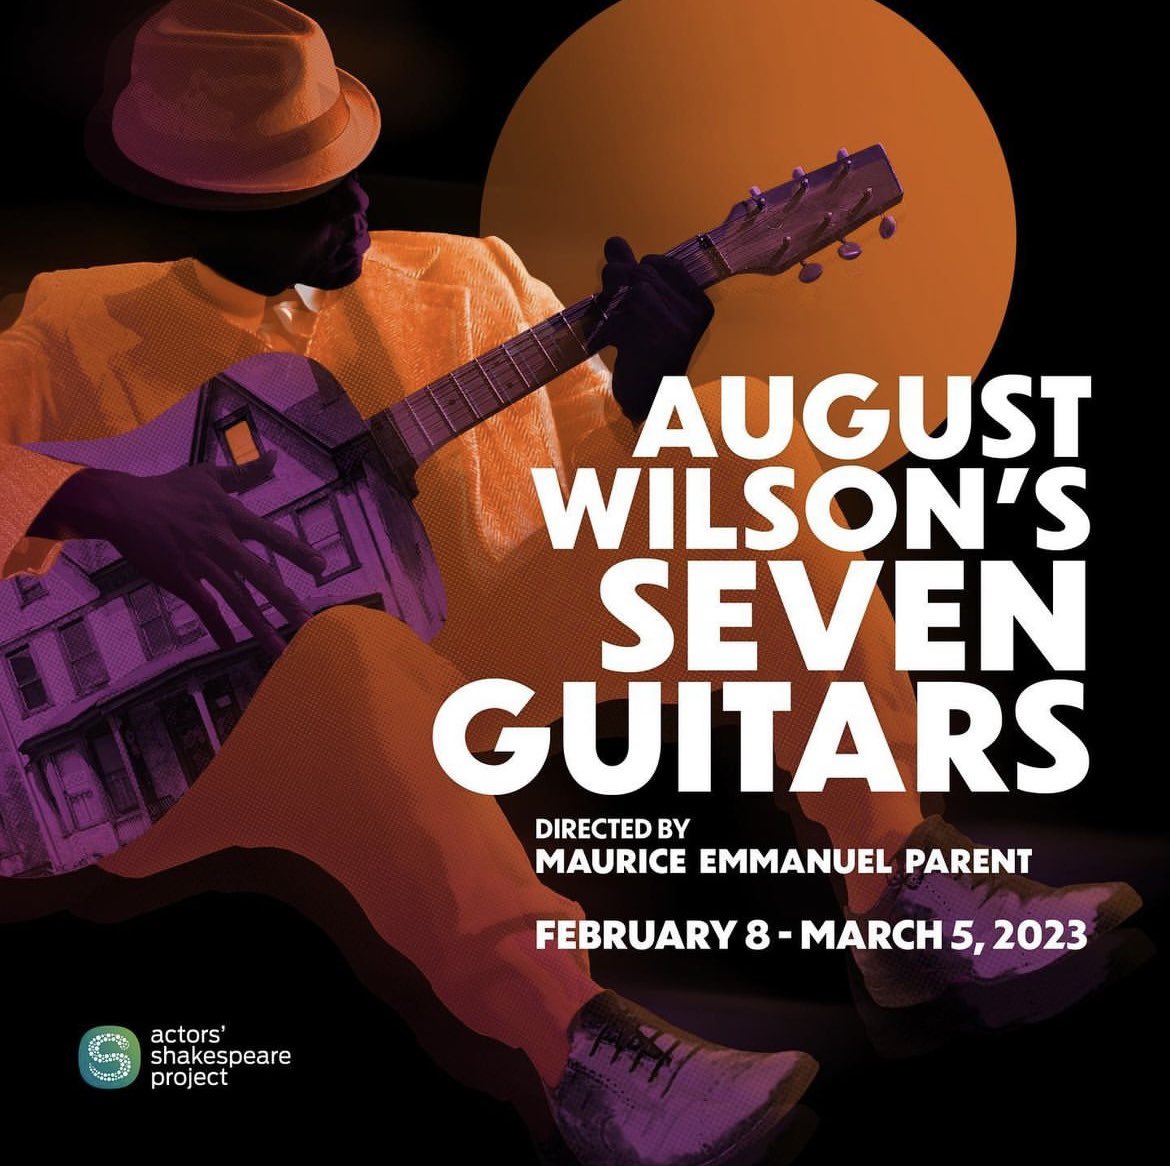 Shoutout to Co-Producing Artisitc Director @MauriceEParent, and his cast and crew, over at @ASPBoston who open #SevenGuitars by #AugustWilson over at @HibernianHall in Roxbury this weekend! #BlackTheater #Boston #AugustWilson #ASPSevenGuitars #BlackHistoryMonth #BlackHistory